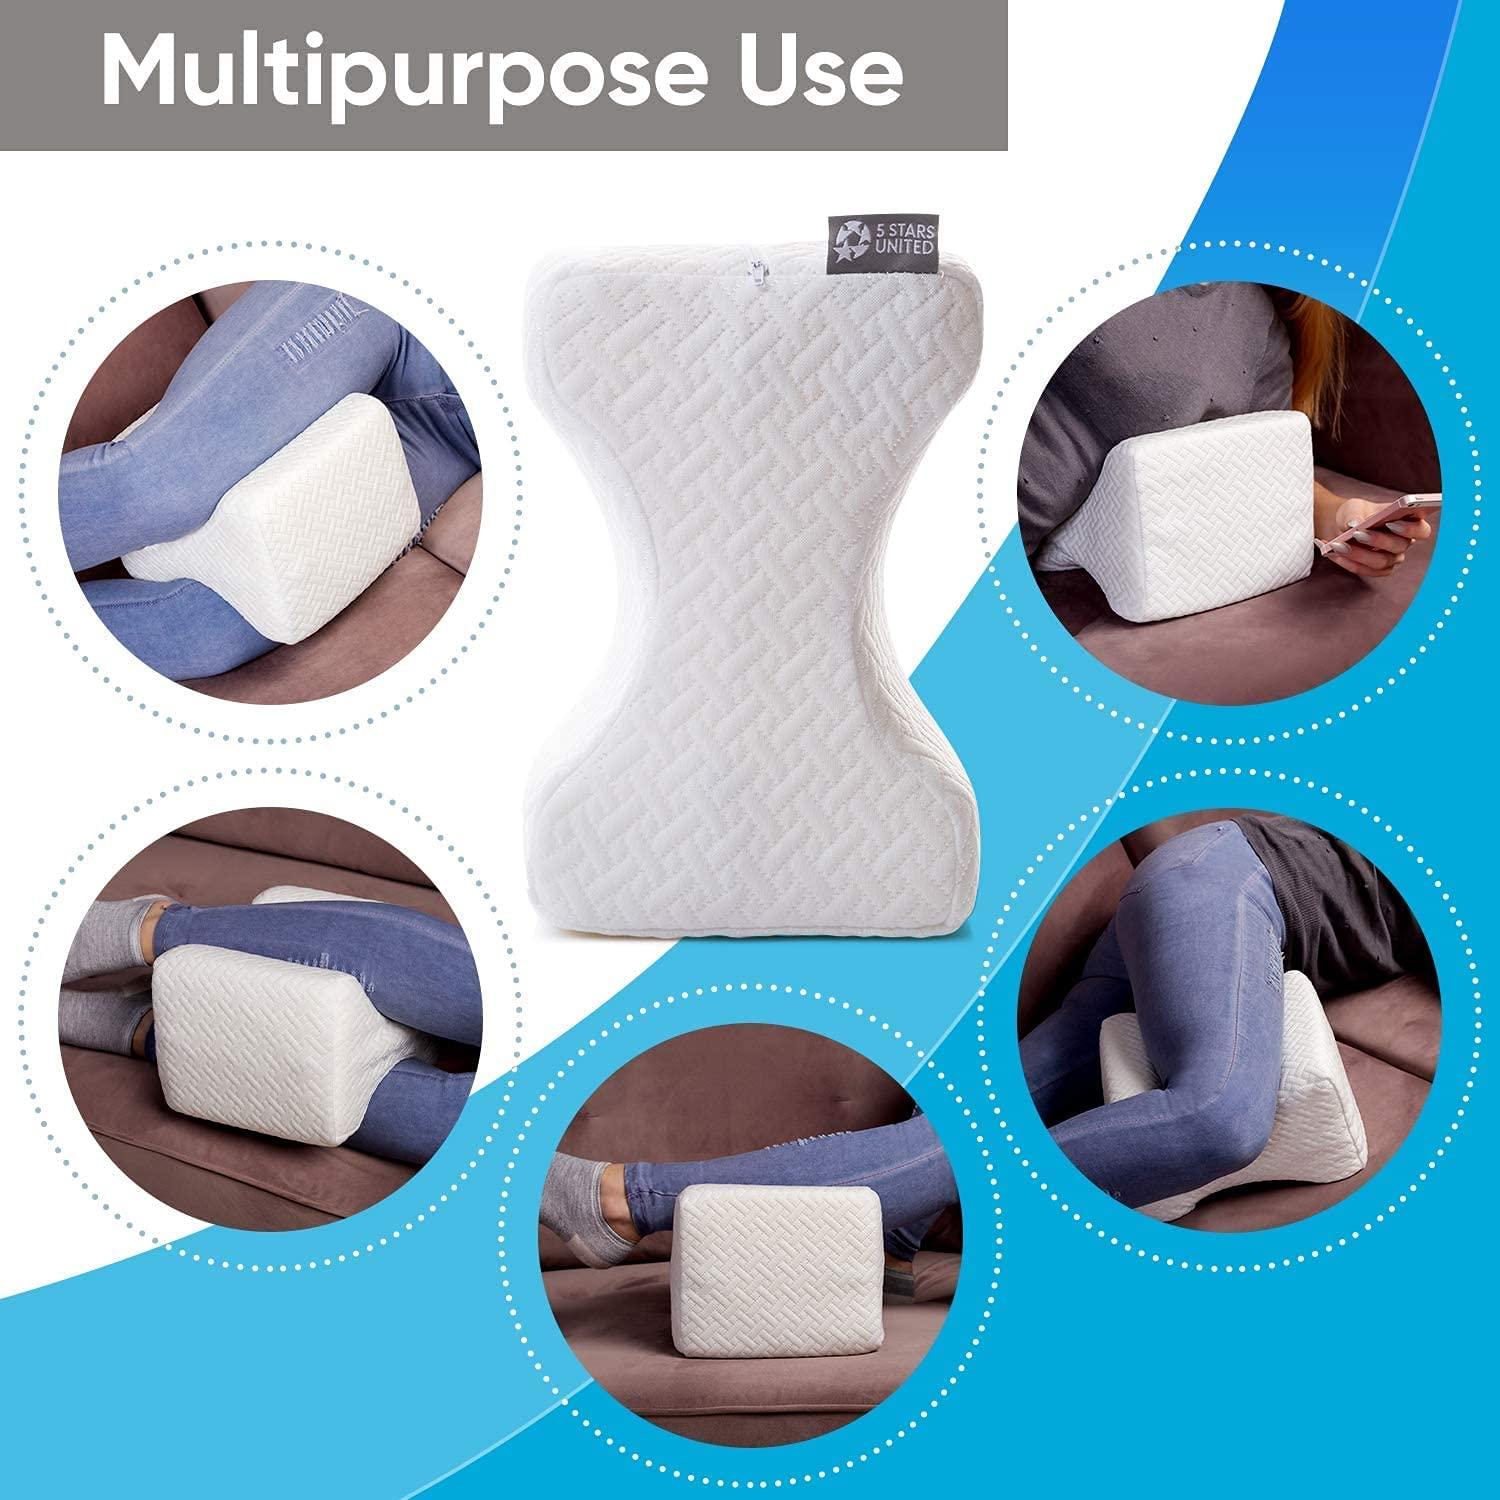 5 STARS UNITED Knee Pillow for Side Sleepers - 100% Memory Foam Wedge  Contour - Leg Pillows